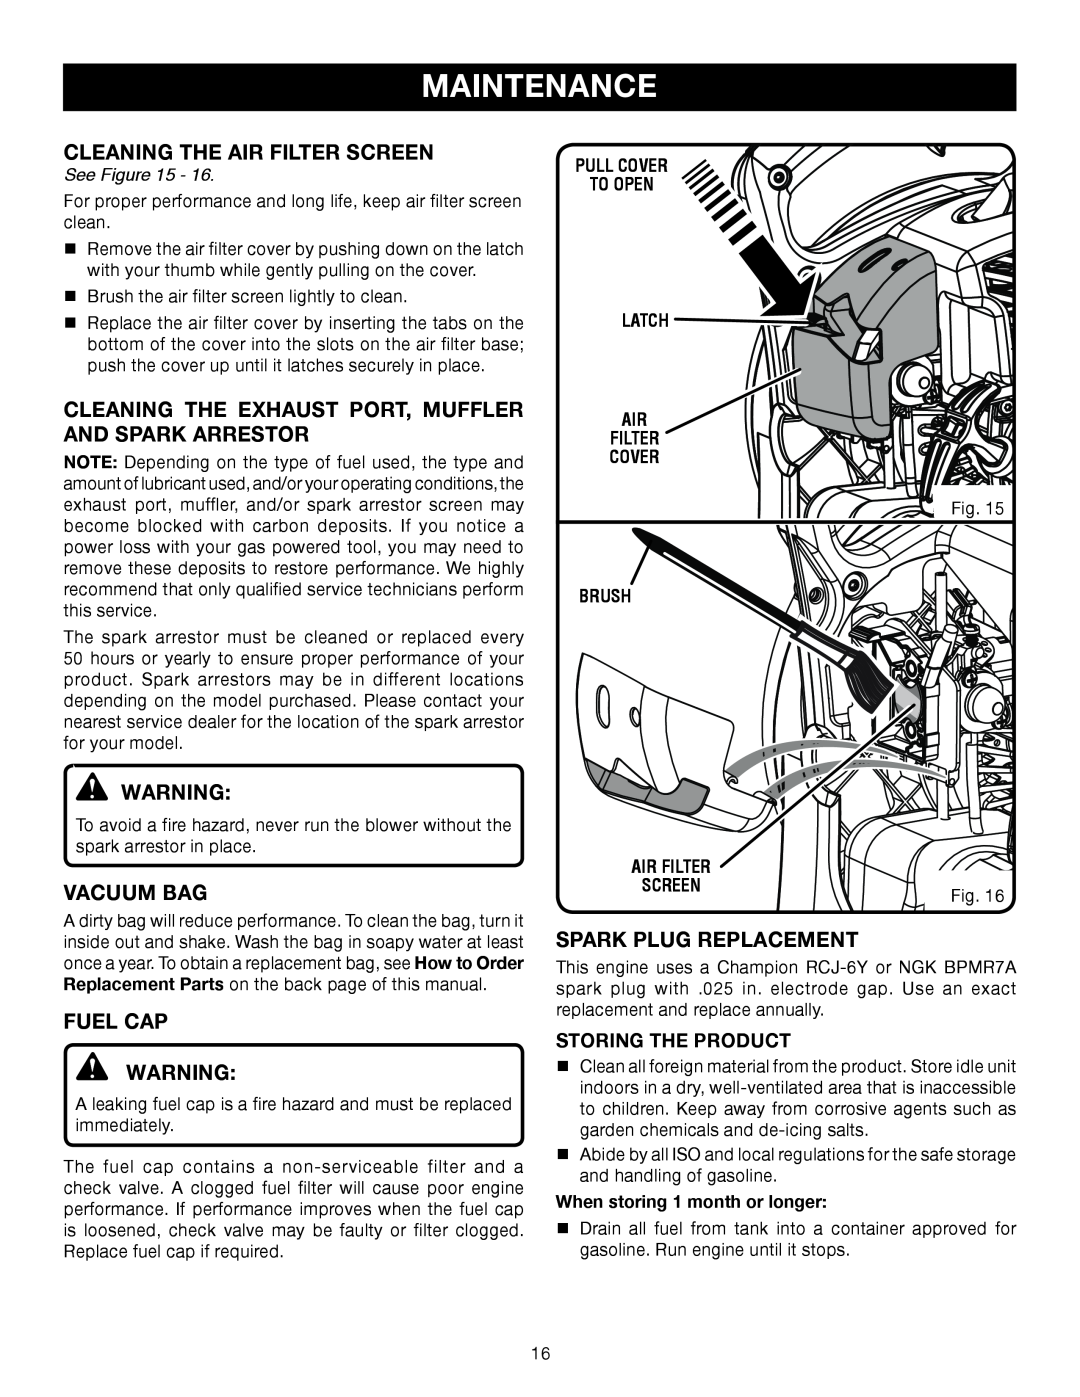 Ryobi RY09907 Cleaning The Air Filter Screen, CLEANING THE EXHAUST PORT, MUFFLER and spark arrestor, Vacuum Bag, Fuel Cap 